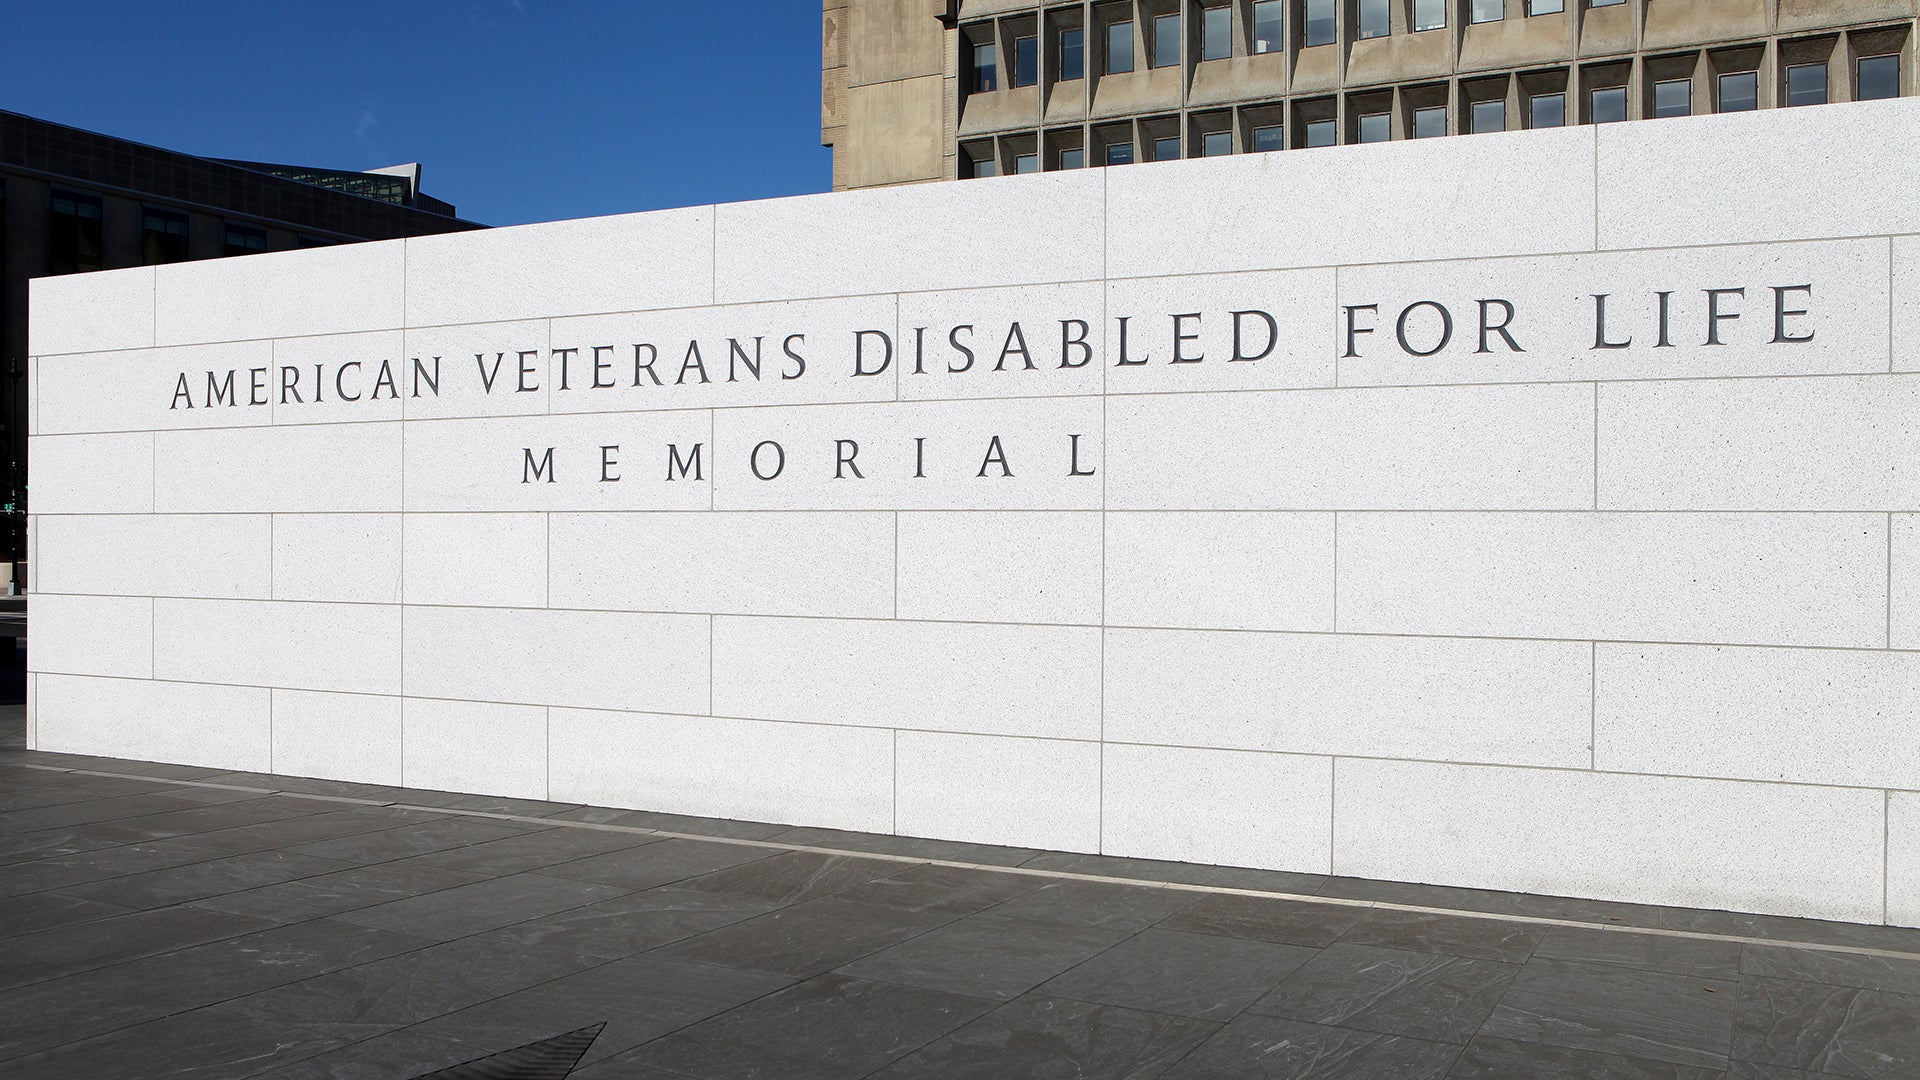 WASHINGTON - APRIL 11:  American Veterans Disabled For Life Memorial on April 11, 2015 in Washington, D.C.  (Photo By Raymond Boyd/Getty Images)